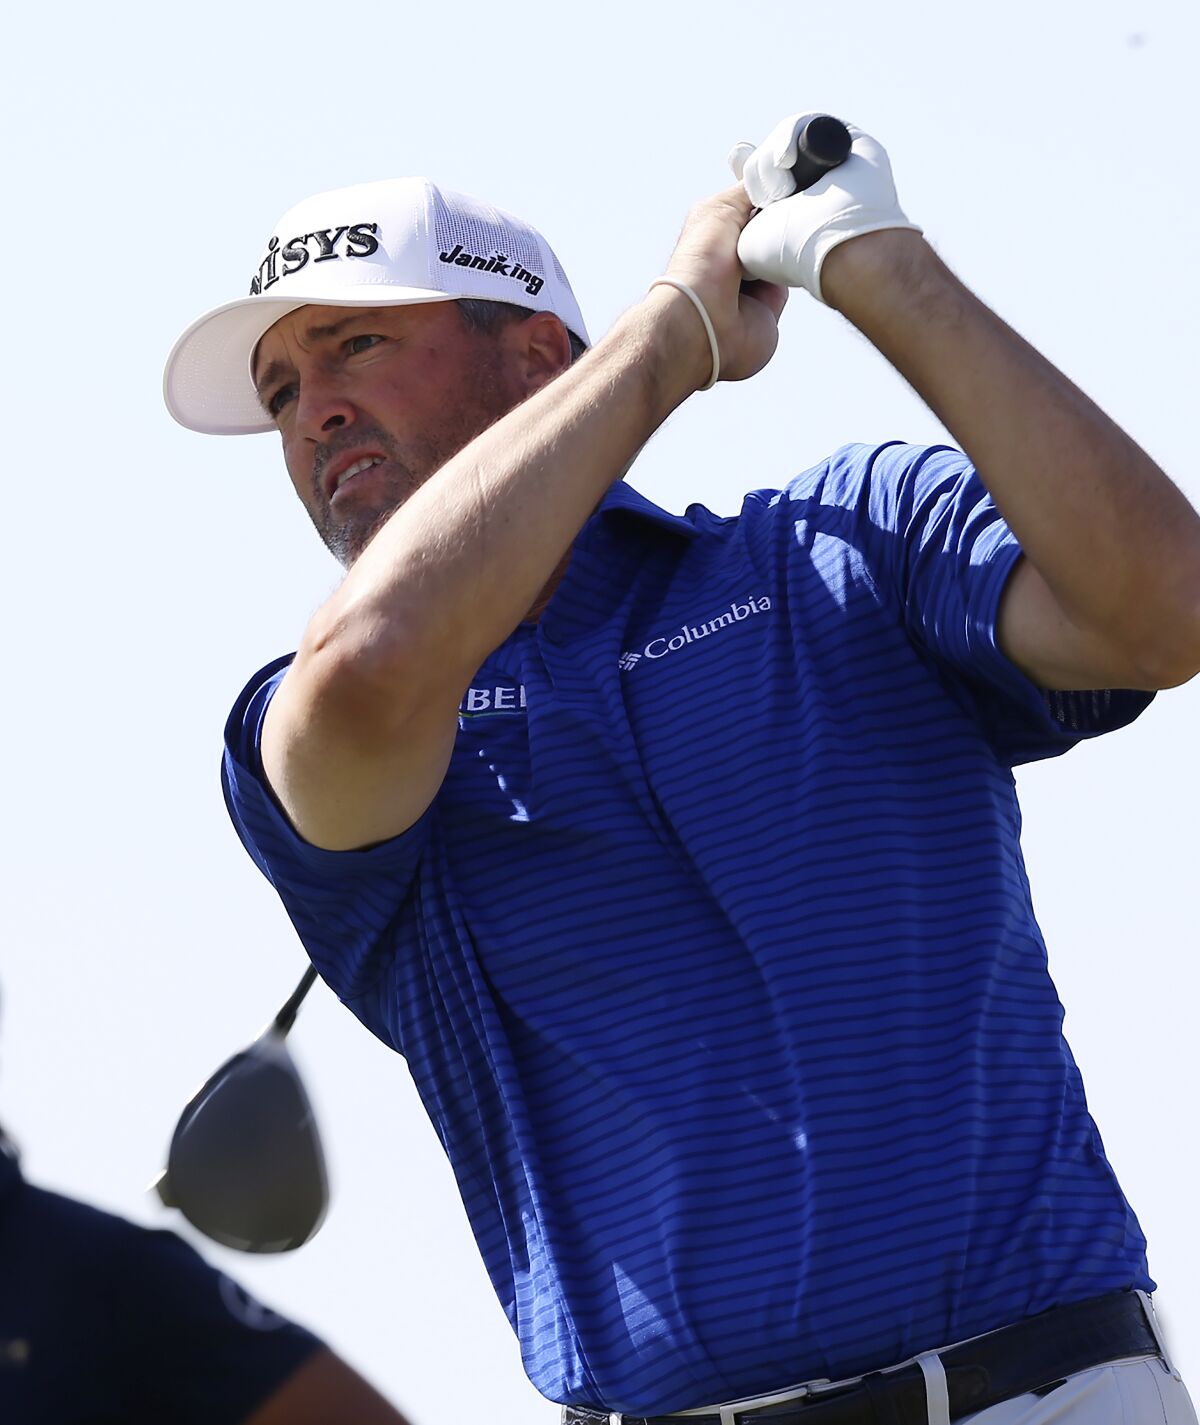 Ryan Palmer watches his shot from the 10th tee during the second day of the Valero Texas Open golf tournament at TPC San Antonio, Friday, April 1, 2022. (Jerry Lara/The San Antonio Express-News via AP)